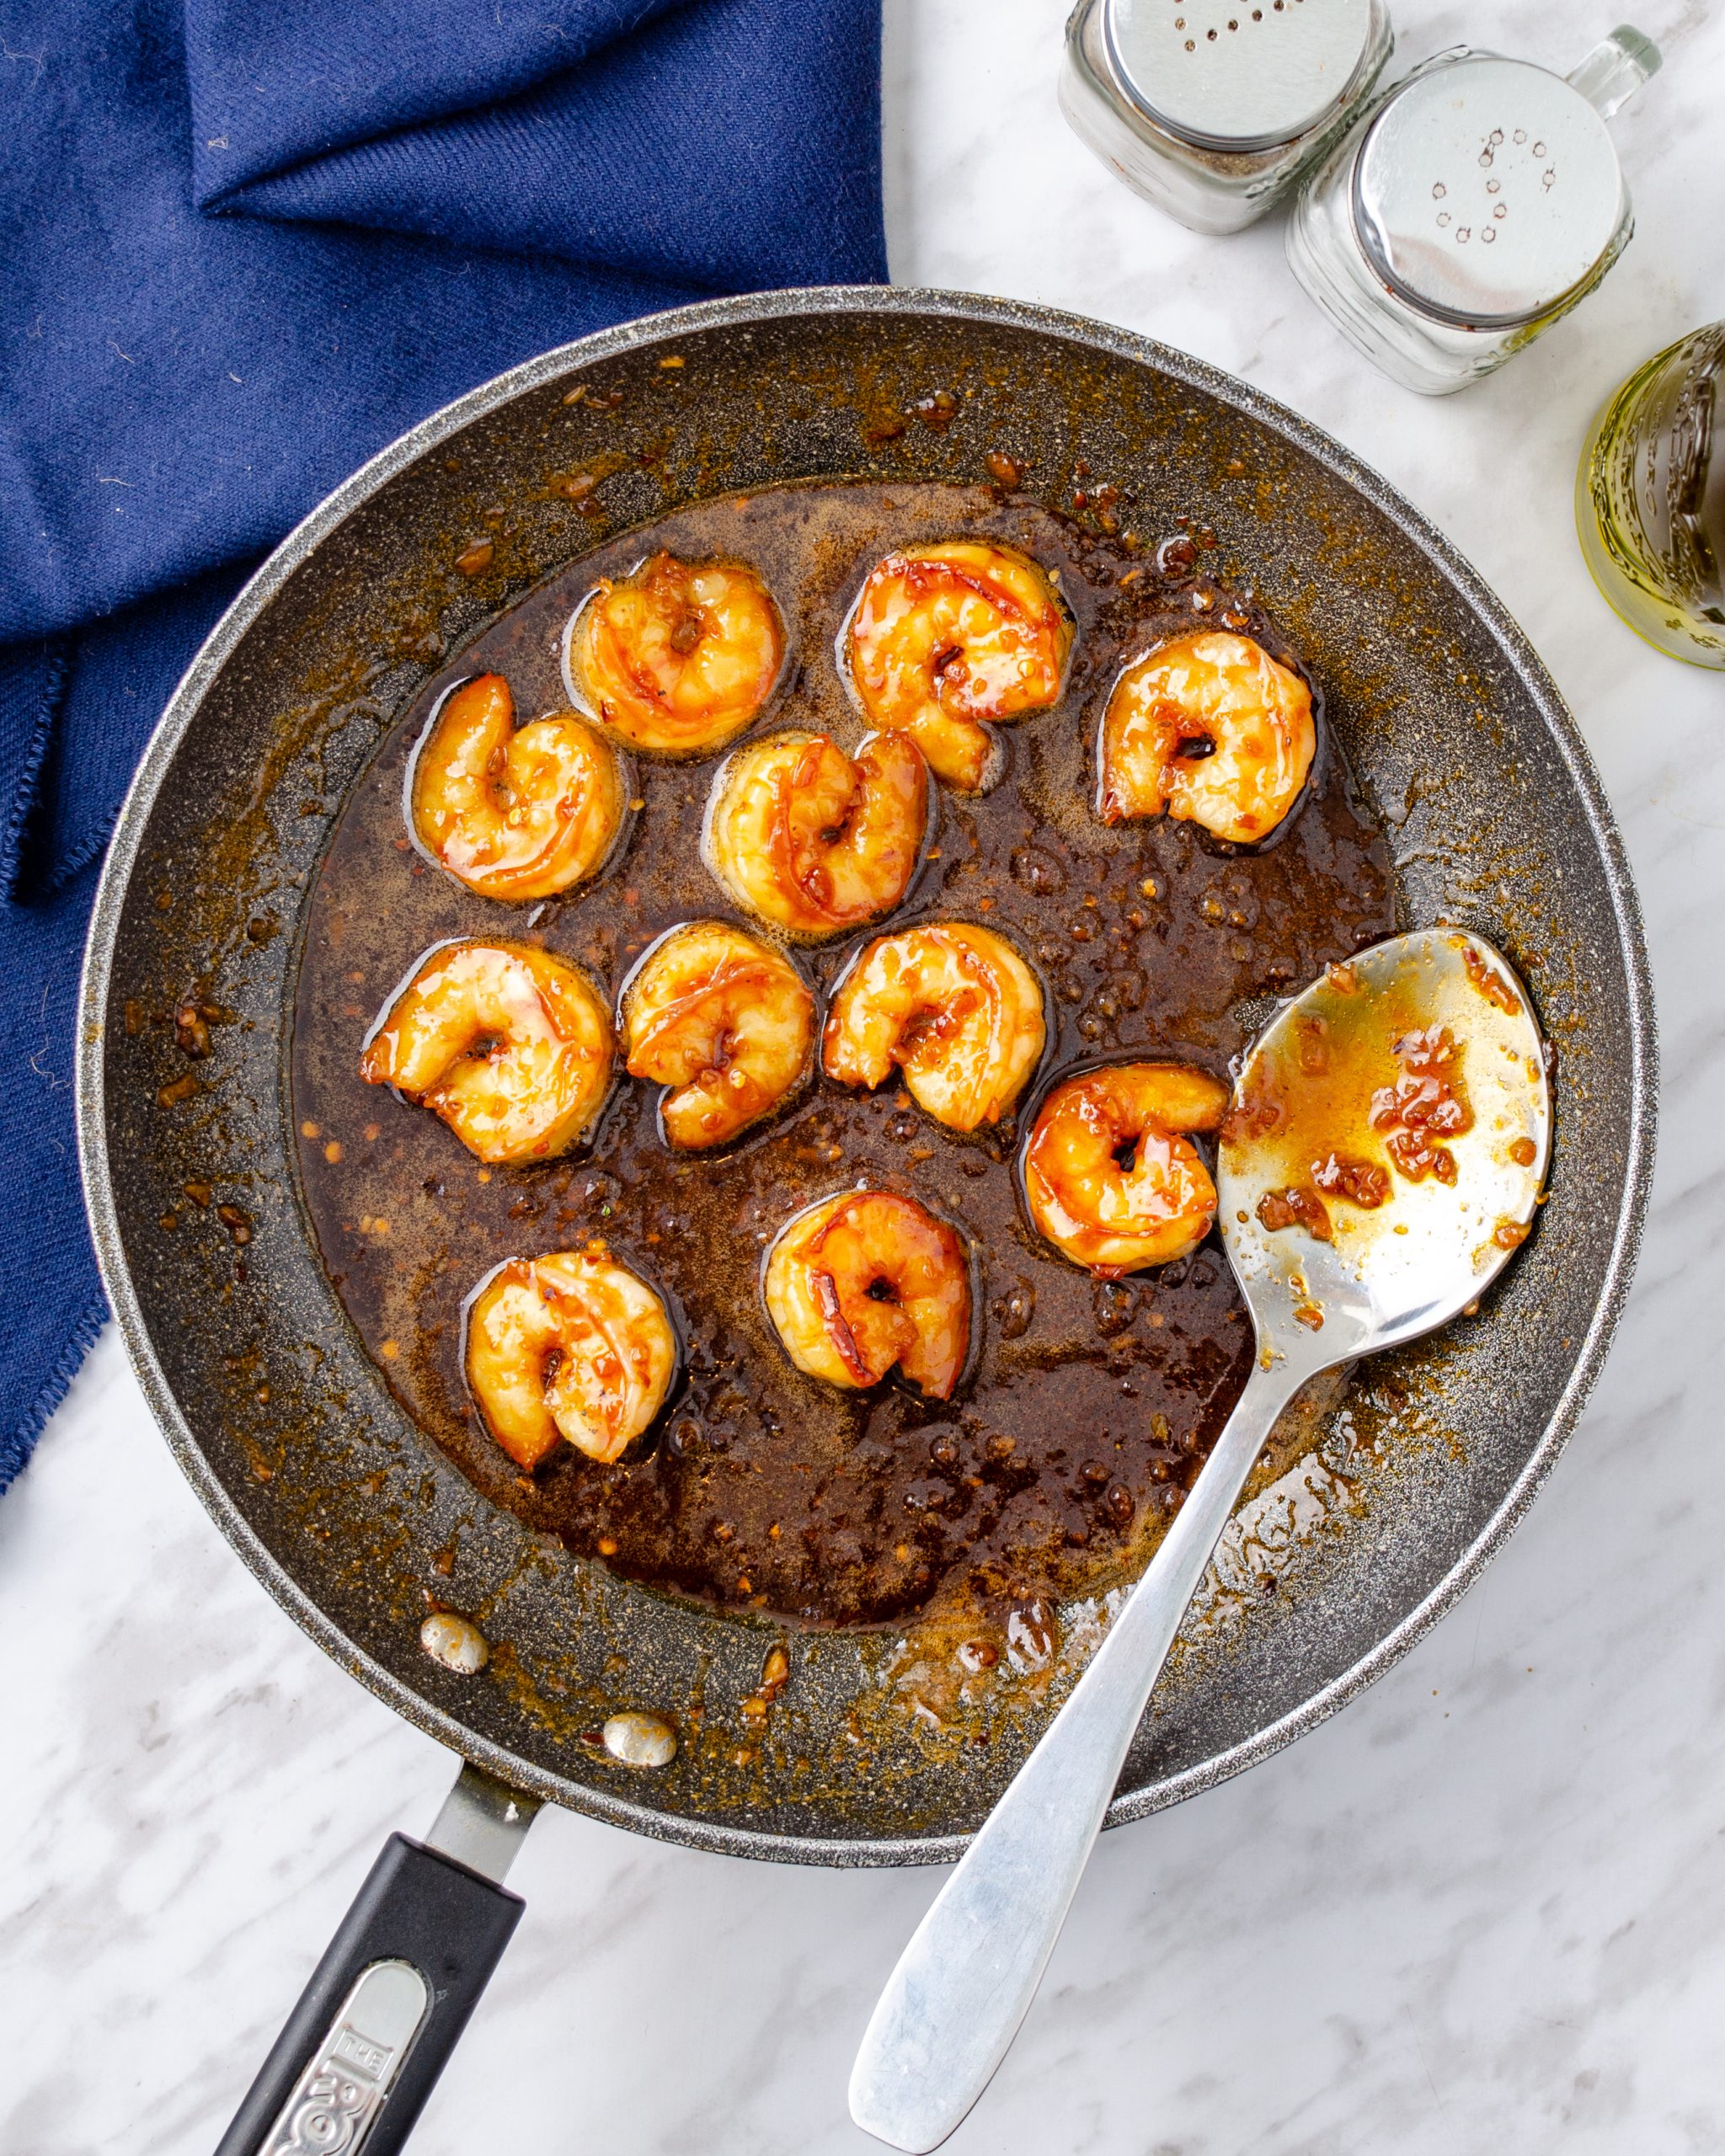 Pour the sauce over the shrimp, reduce the heat on the stove to medium and saute until the sauce thickens and becomes a bit sticky.